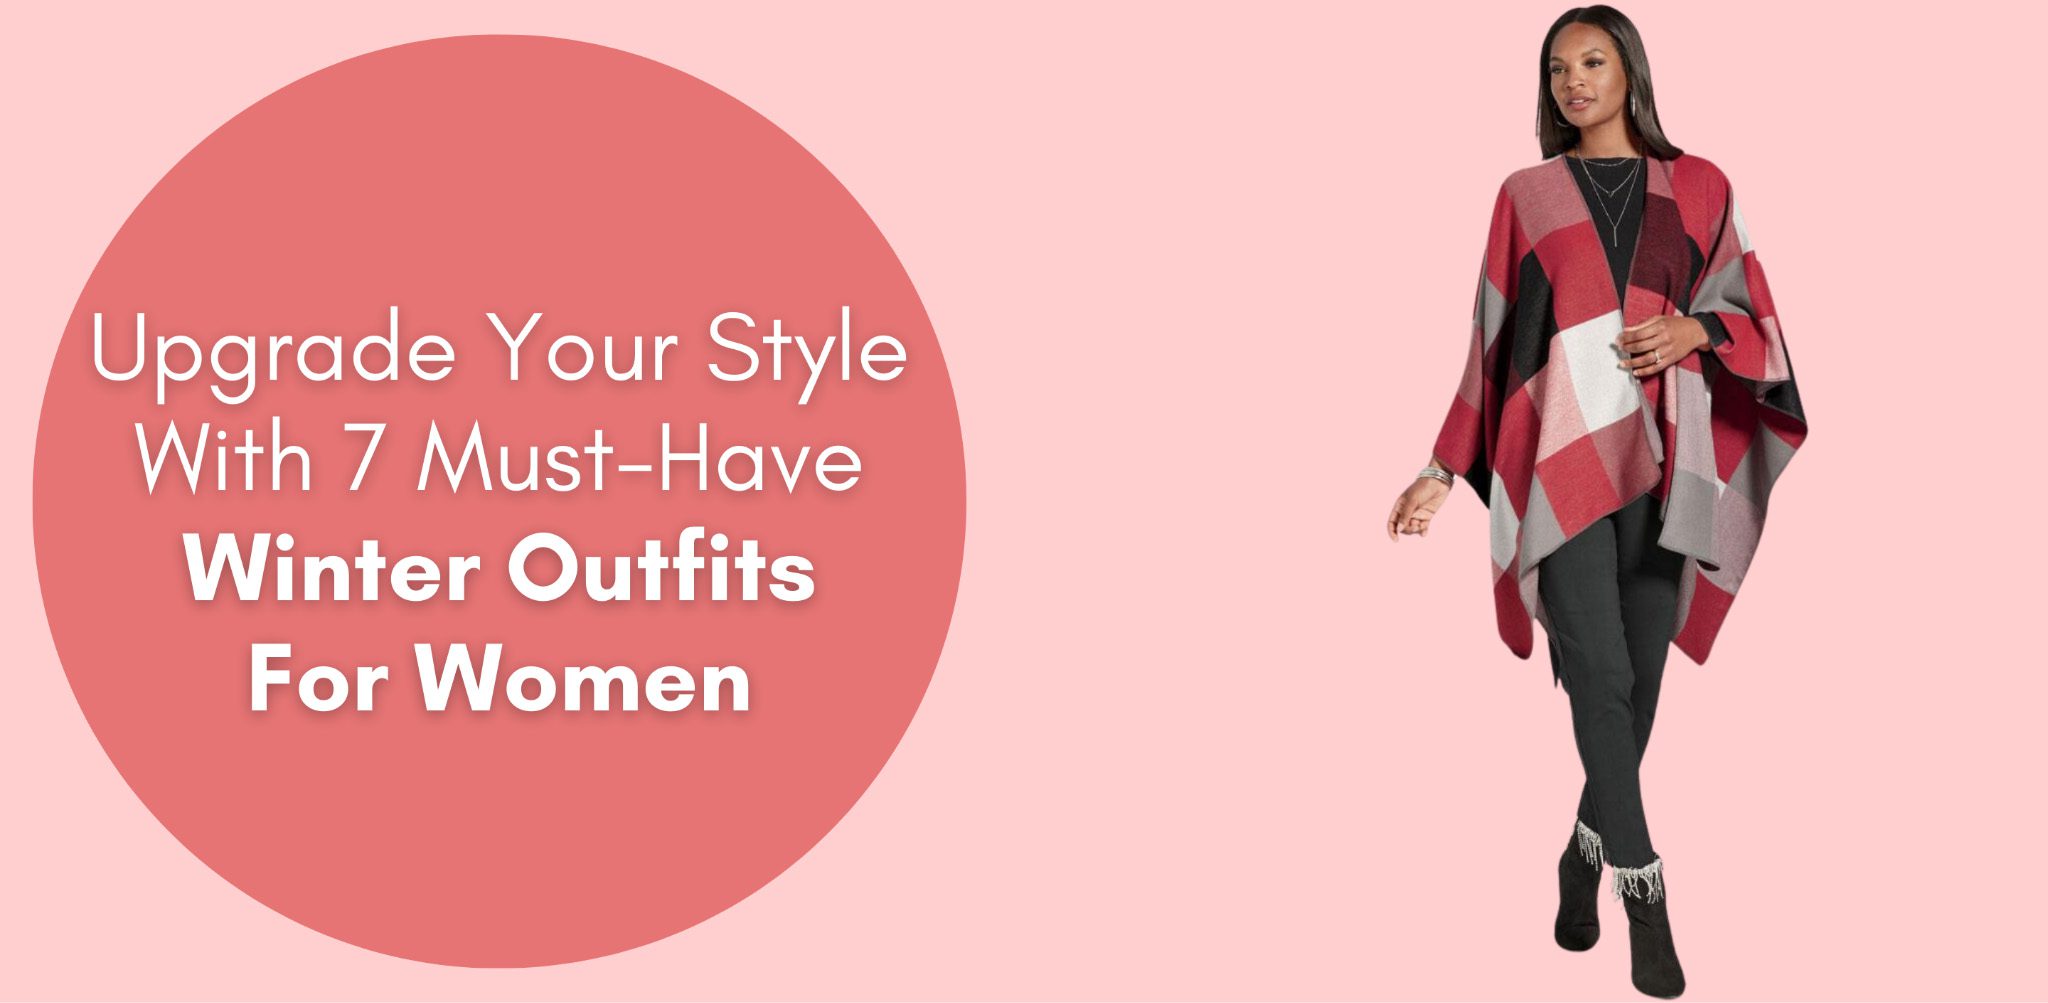 upgrade your style with 7 must have winter must-have outfits for women